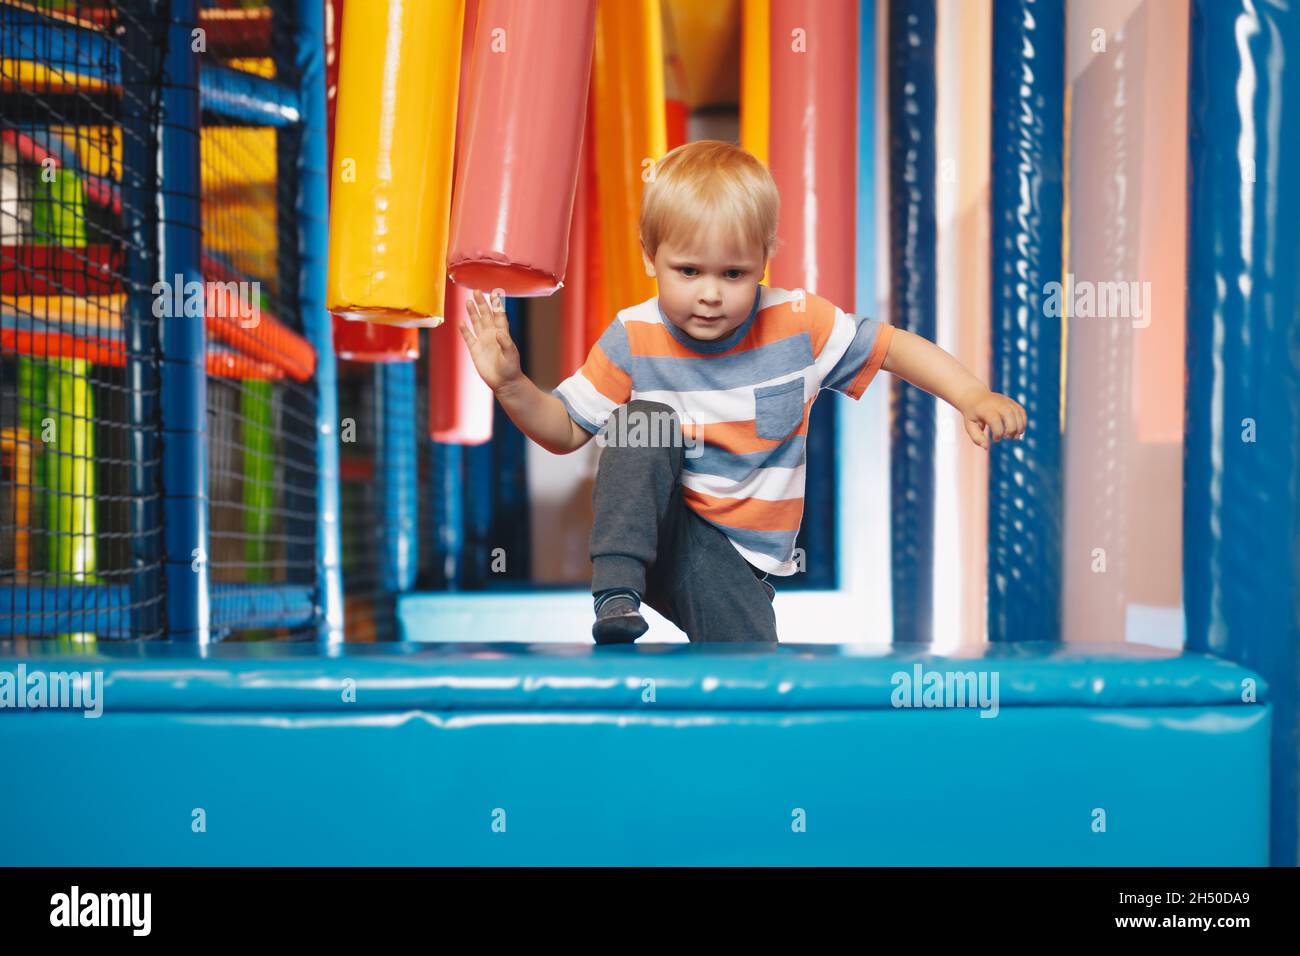 Happy boy jumping over obstacles in a Indoor playground. Kid jumping on playground cushions. Child having fun on modern playground. Cute kid playing o Stock Photo